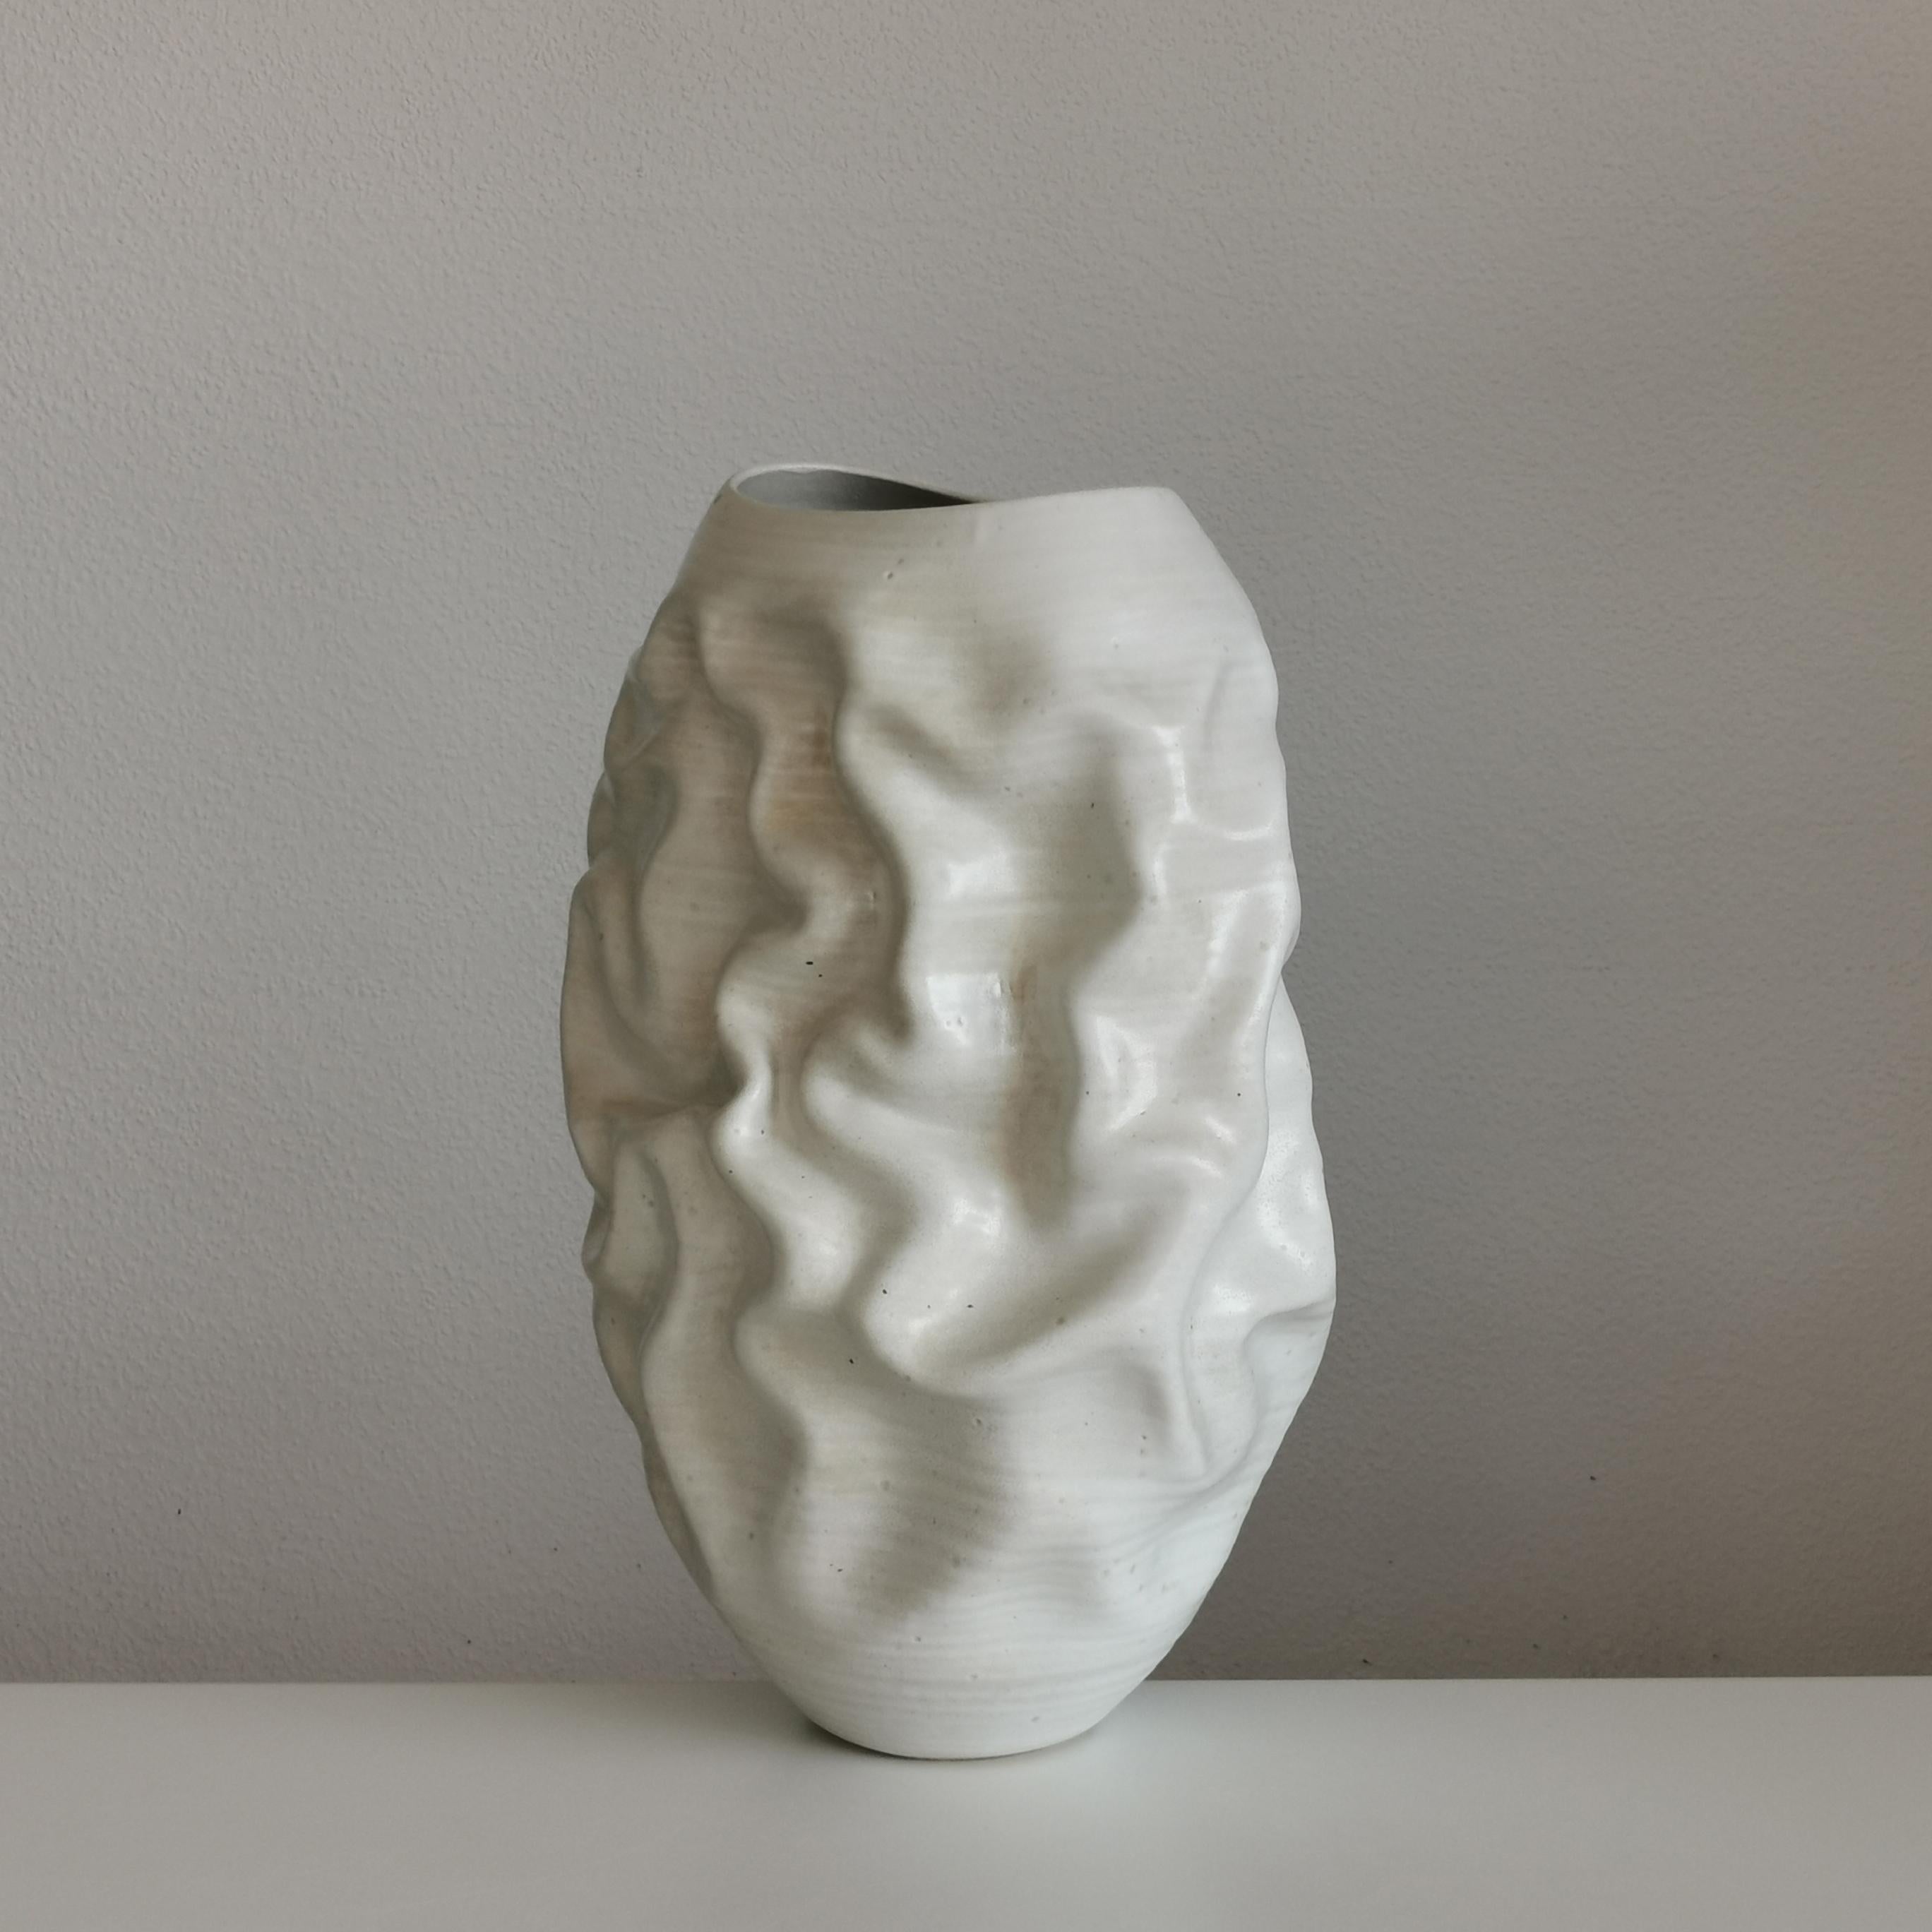 Medium Large White Dehydrated Form, Vessel No.126, Ceramic Sculpture For Sale 4